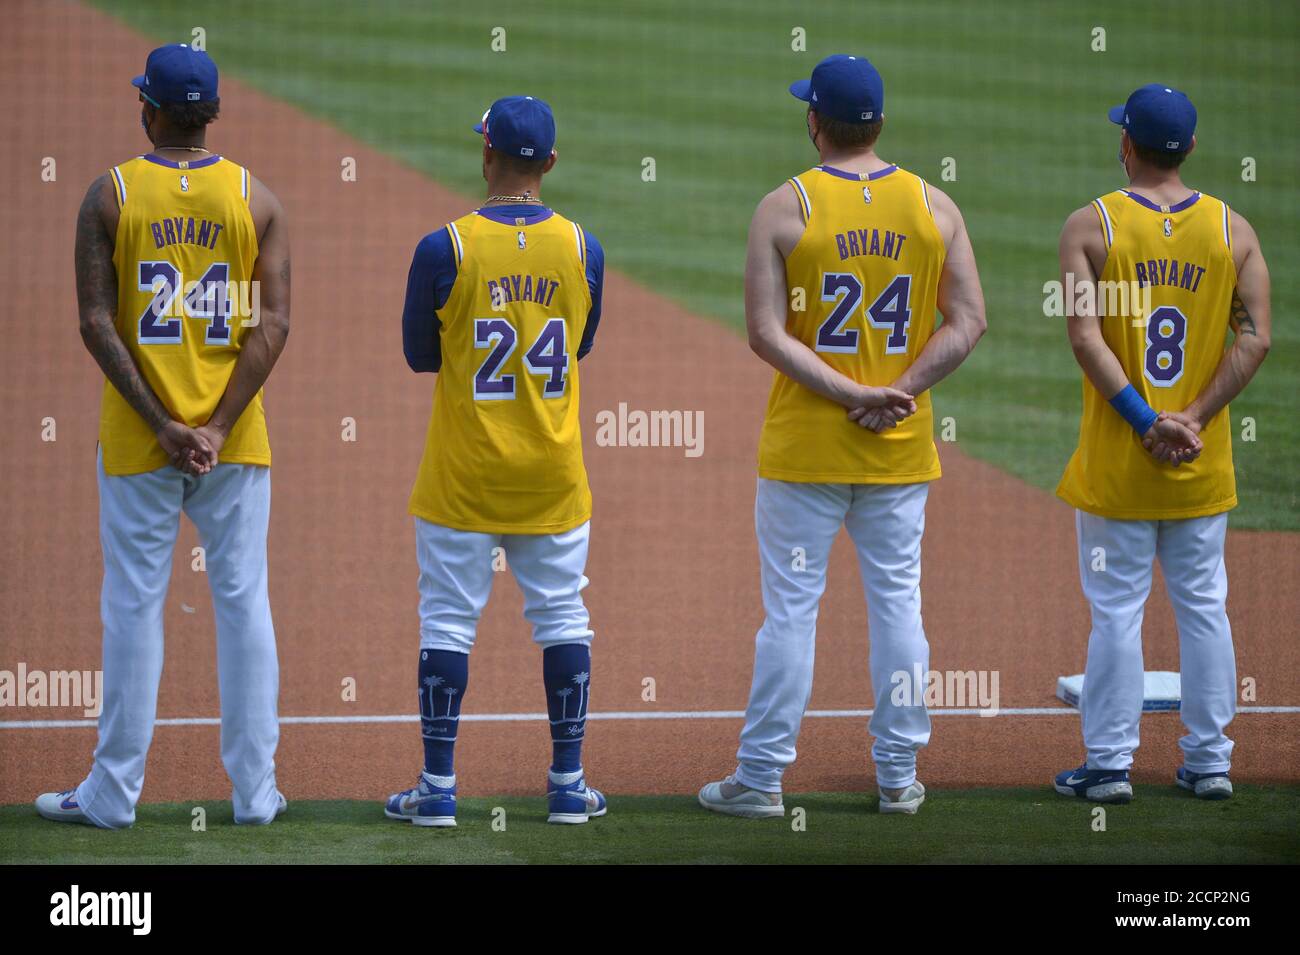 Here are the Kobe Bryant jersey's the Dodgers wore